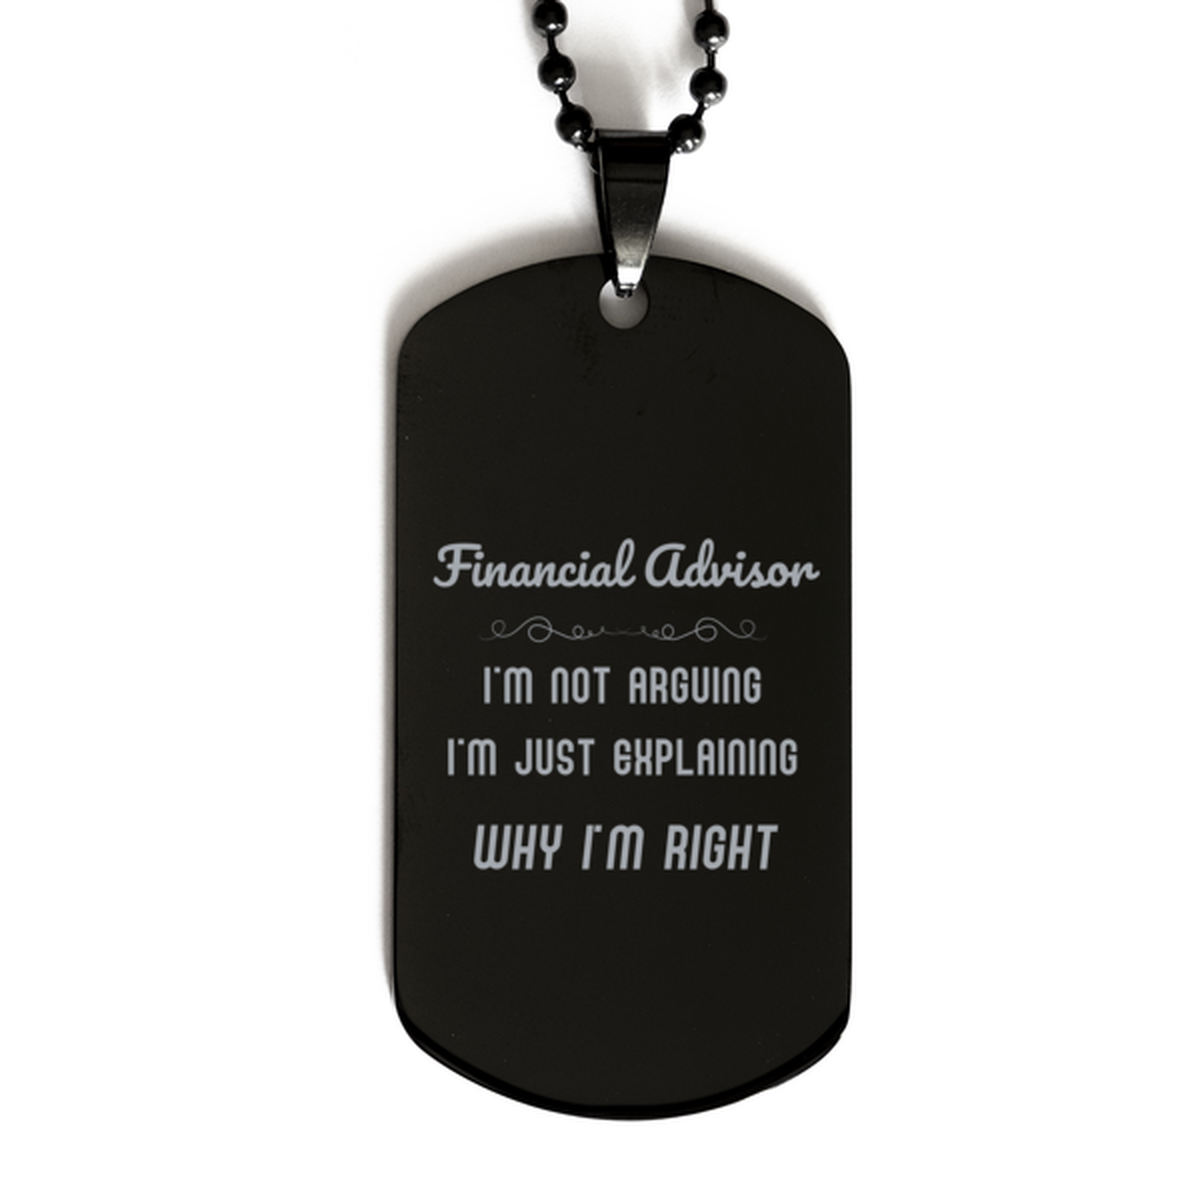 Financial Advisor I'm not Arguing. I'm Just Explaining Why I'm RIGHT Black Dog Tag, Funny Saying Quote Financial Advisor Gifts For Financial Advisor Graduation Birthday Christmas Gifts for Men Women Coworker